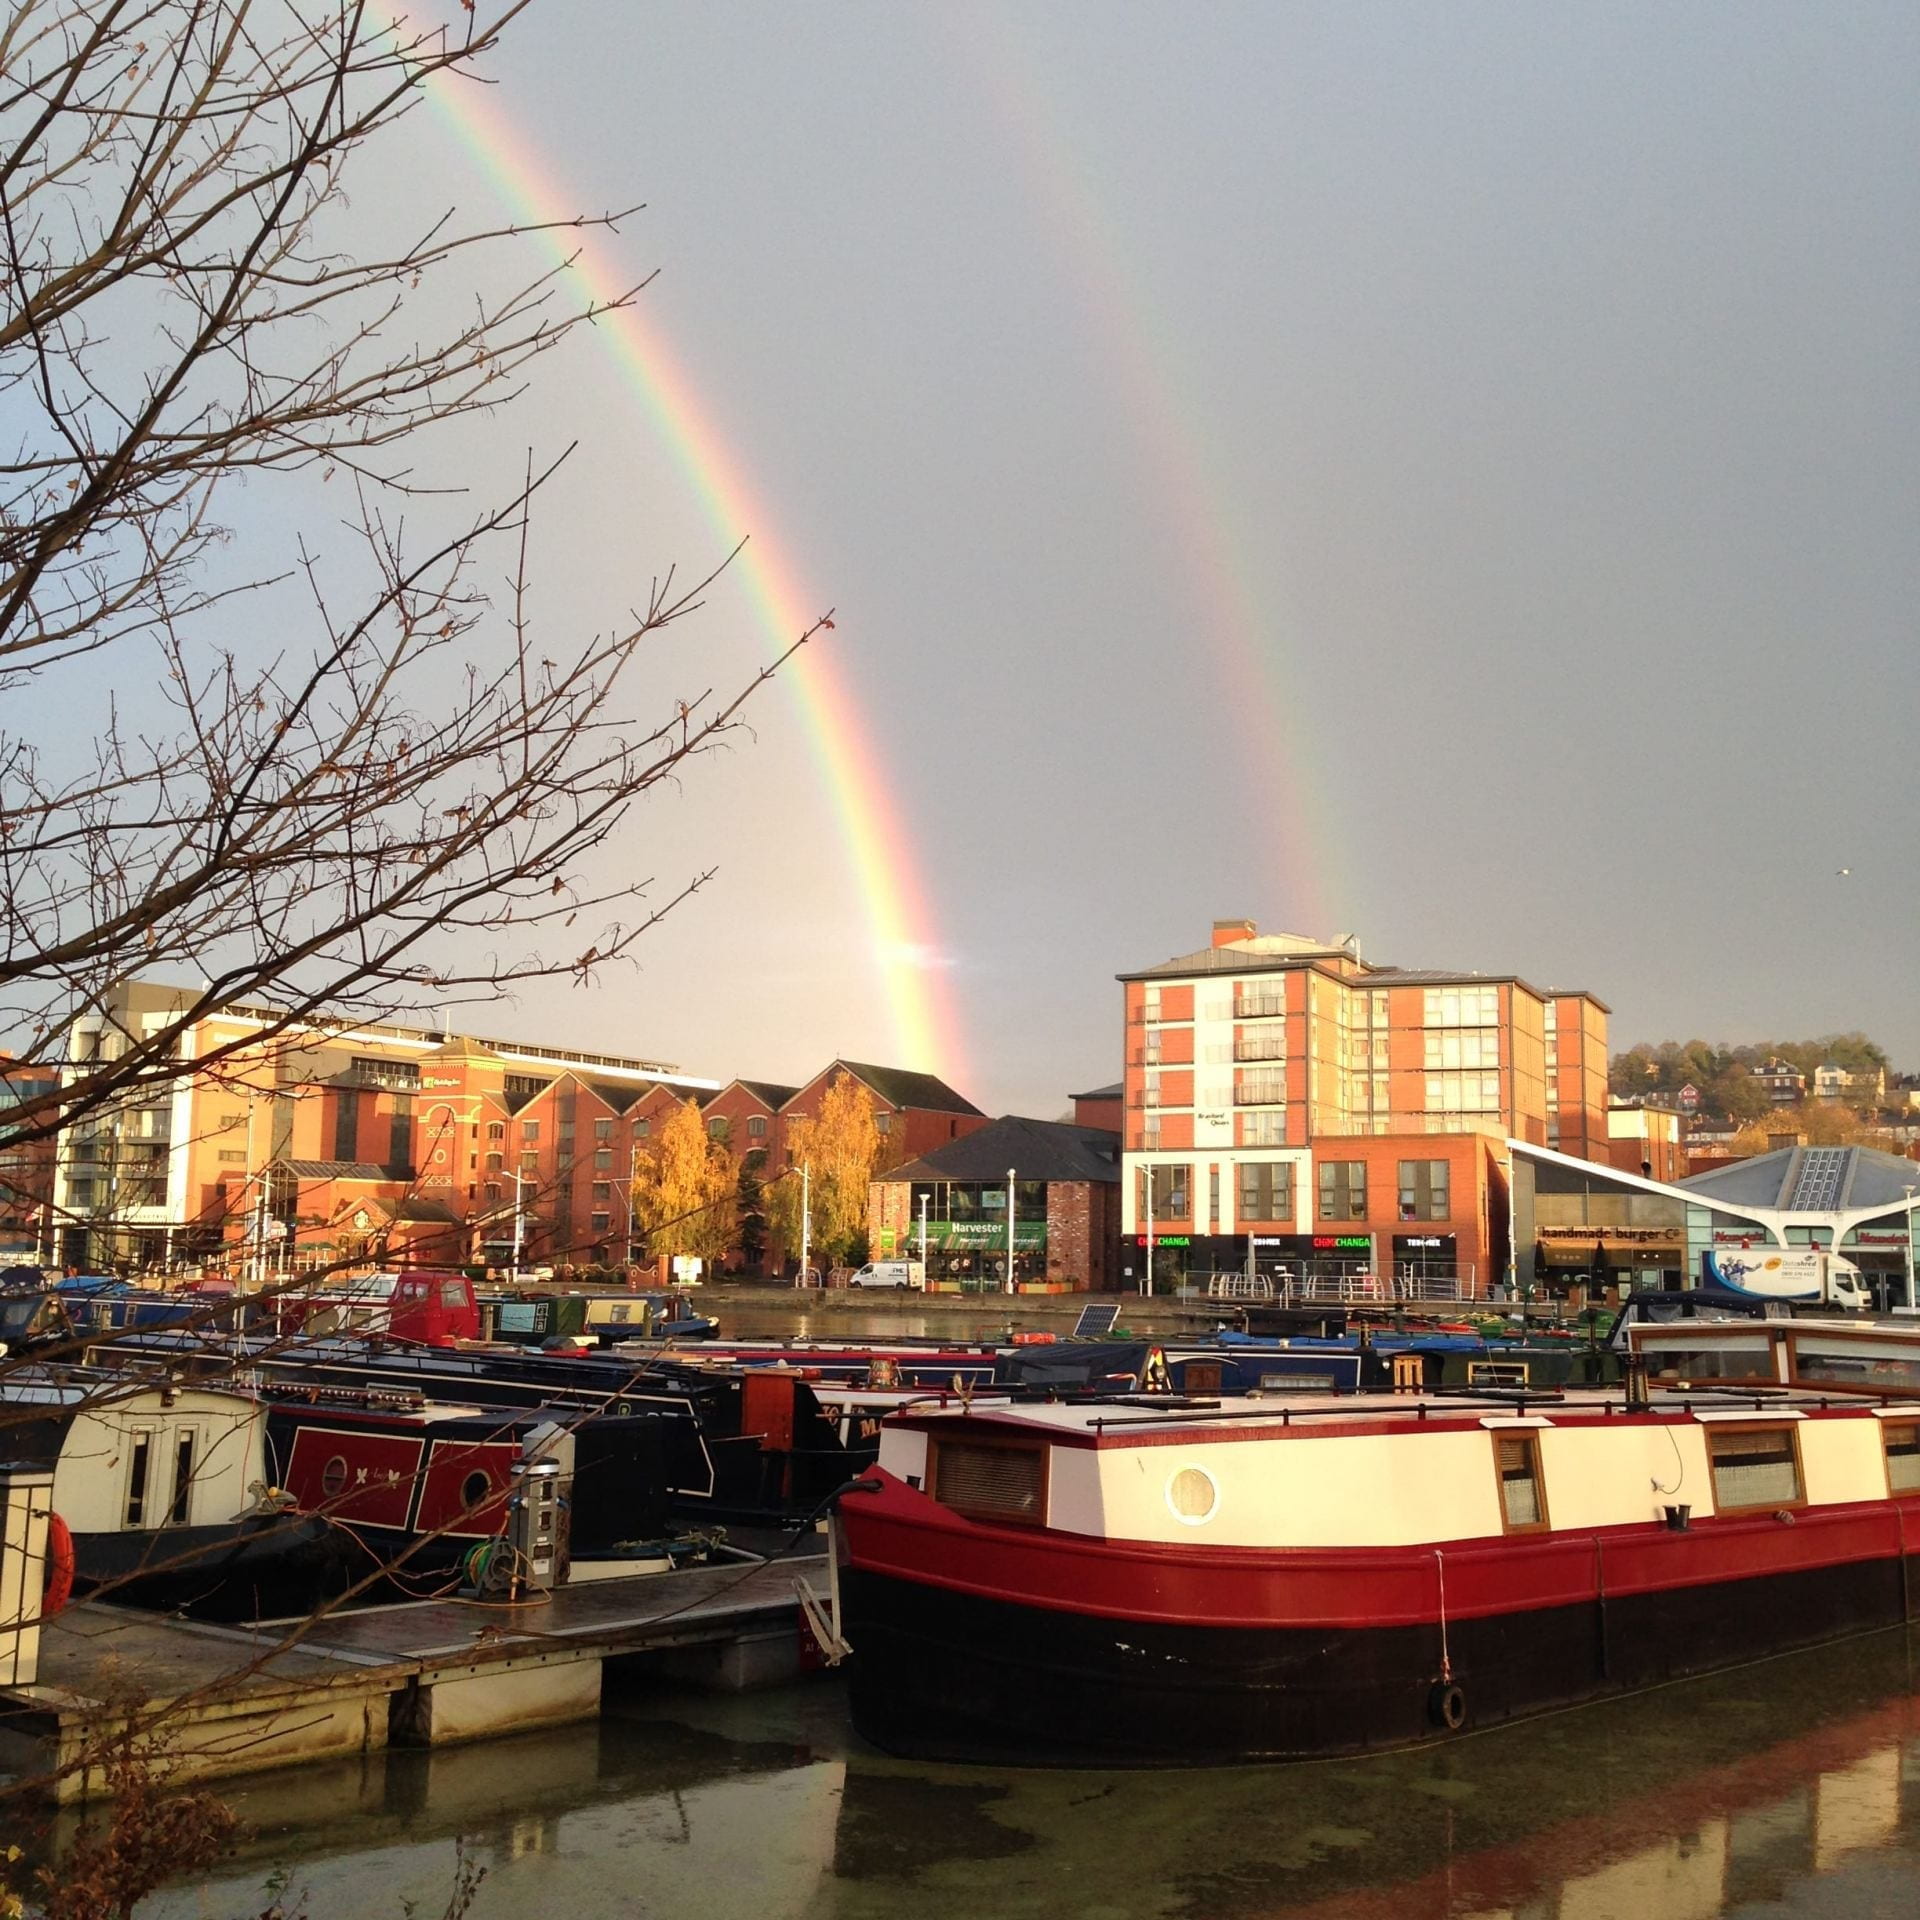 Two rainbows, above buildings and boats across the Brayford Pool.